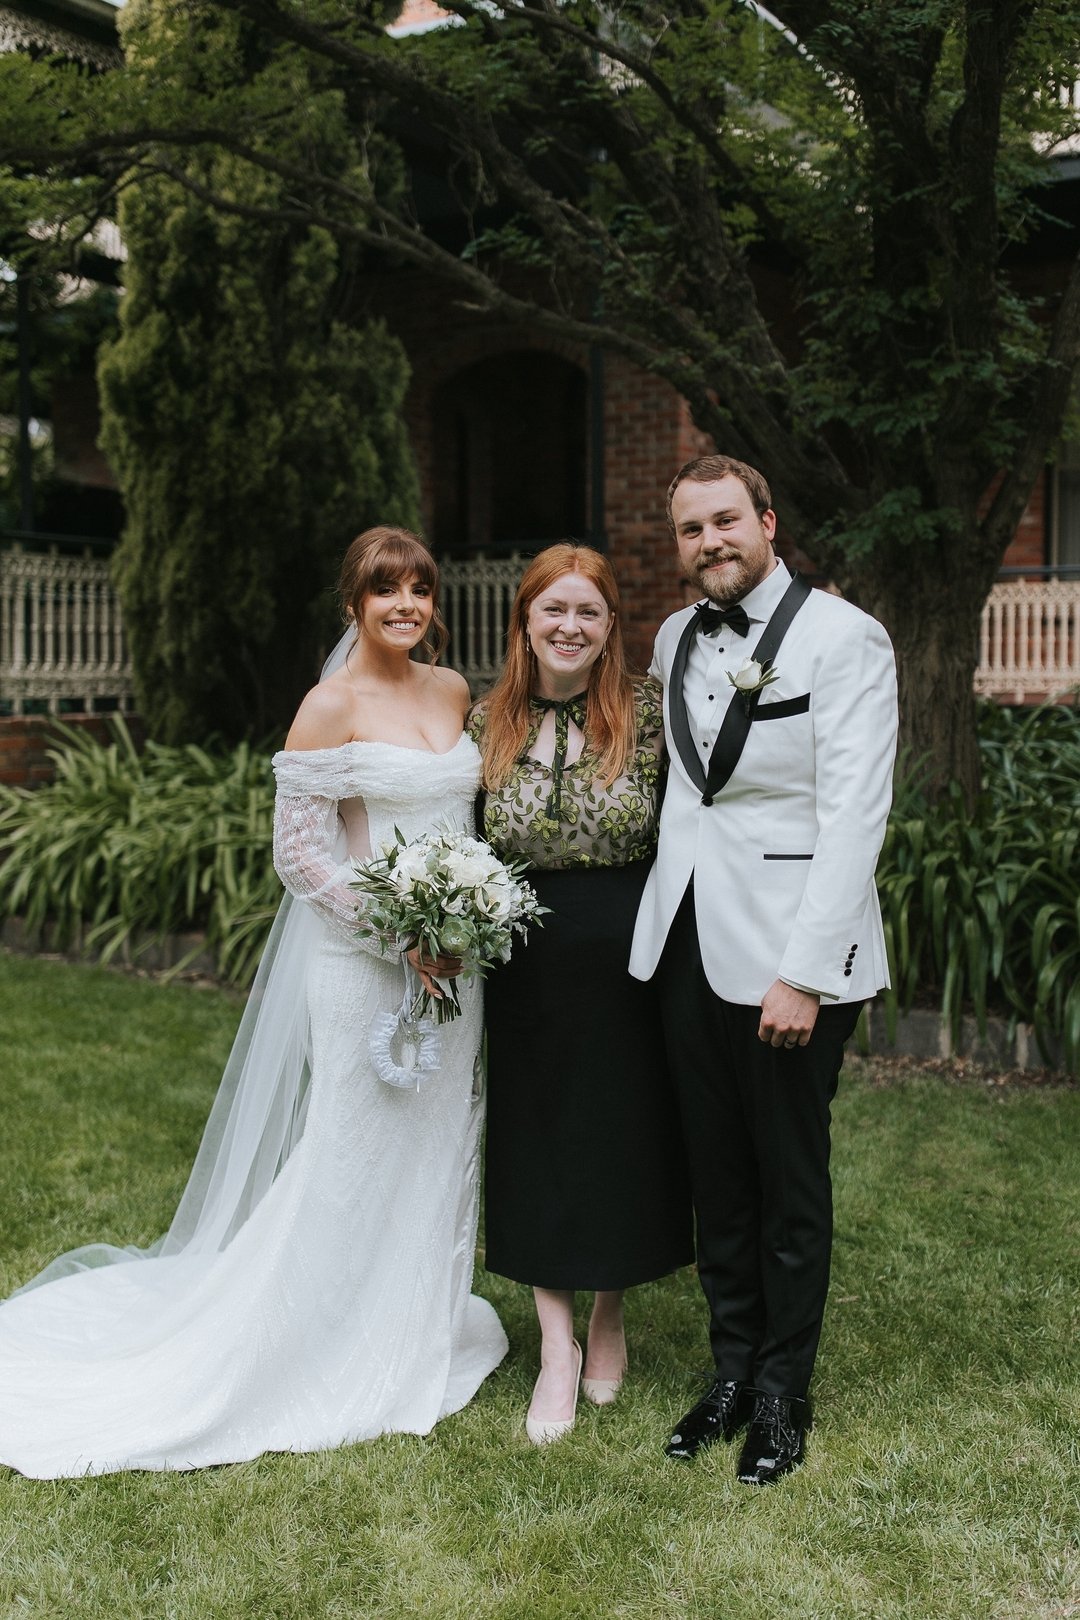 The most beautiful two humans I've had the fortune to meet and marry! 

Captured by the glorious @hayleyhickmanphotography

#melbournewedding #weddinginspo #celebrant #melbournecelebrant #weddingcelebrant #weddingcelebrantmelbourne #weddingphotograph